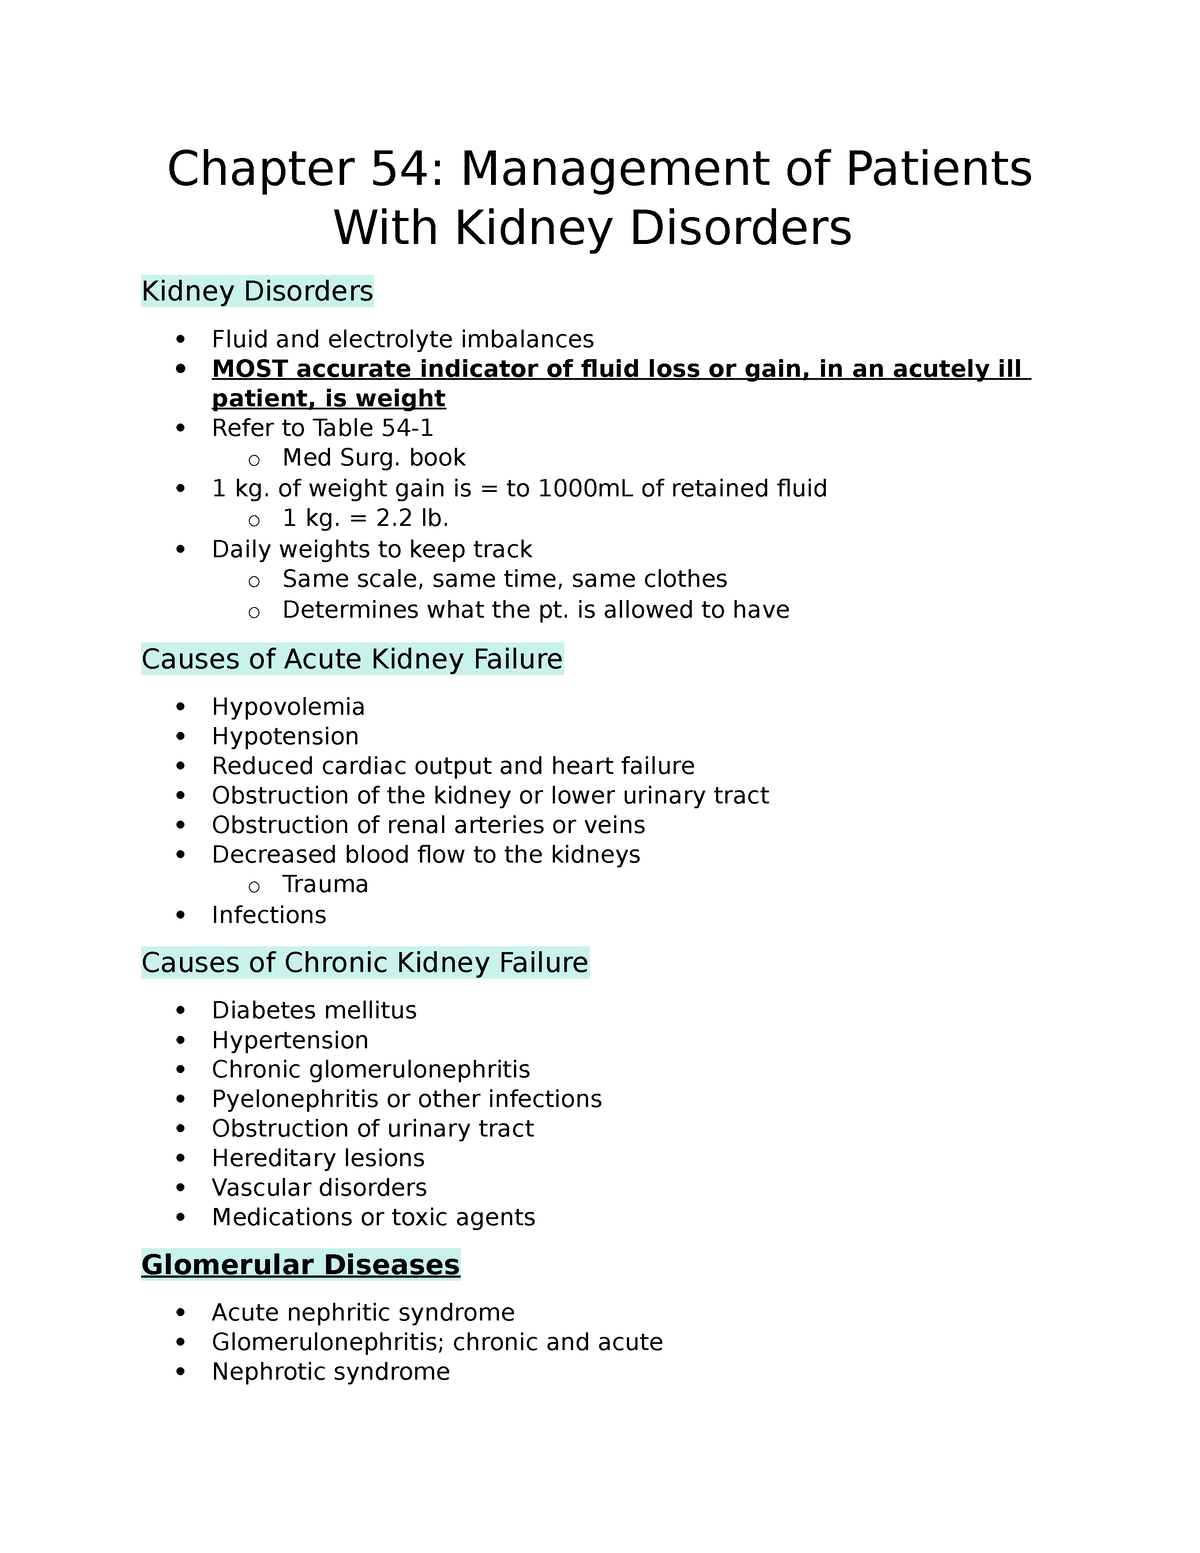 case study chapter 54 management of patients with kidney disorders